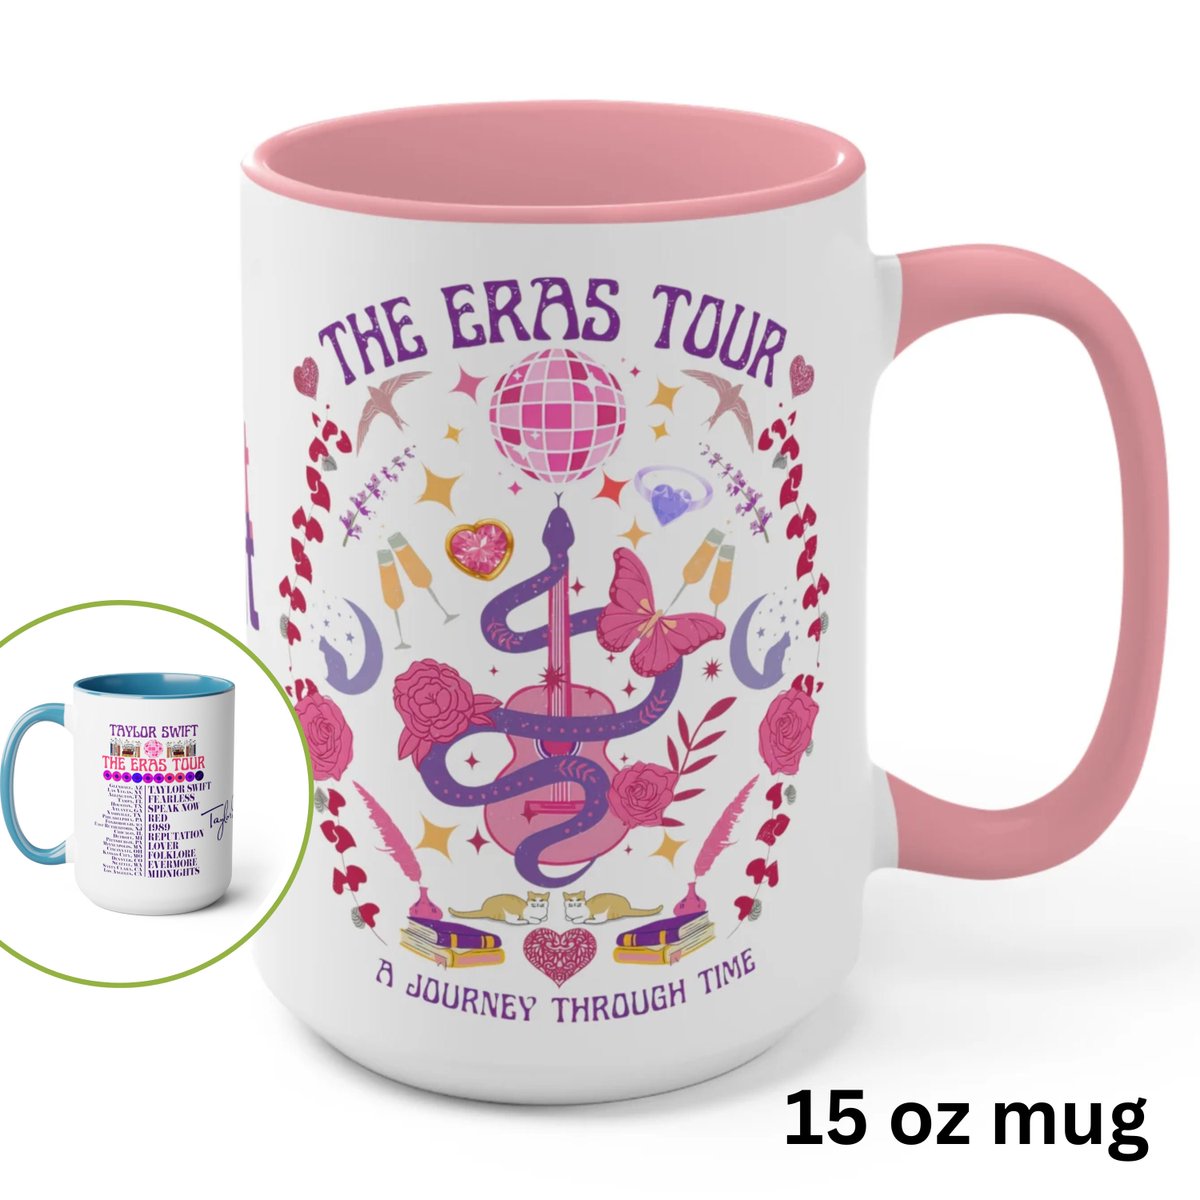 Excited to share the latest addition to my #etsy shop: Taylor Swift Eras Mug, Concert Cities Tour Mug, Swiftie Fan Coffee Mug, Merch for Girls Trip, Bachelorette Birthday Party Gift Supply etsy.me/3IPBr53 #white #birthday #yes #lovefriendship #ceramic #merchfor